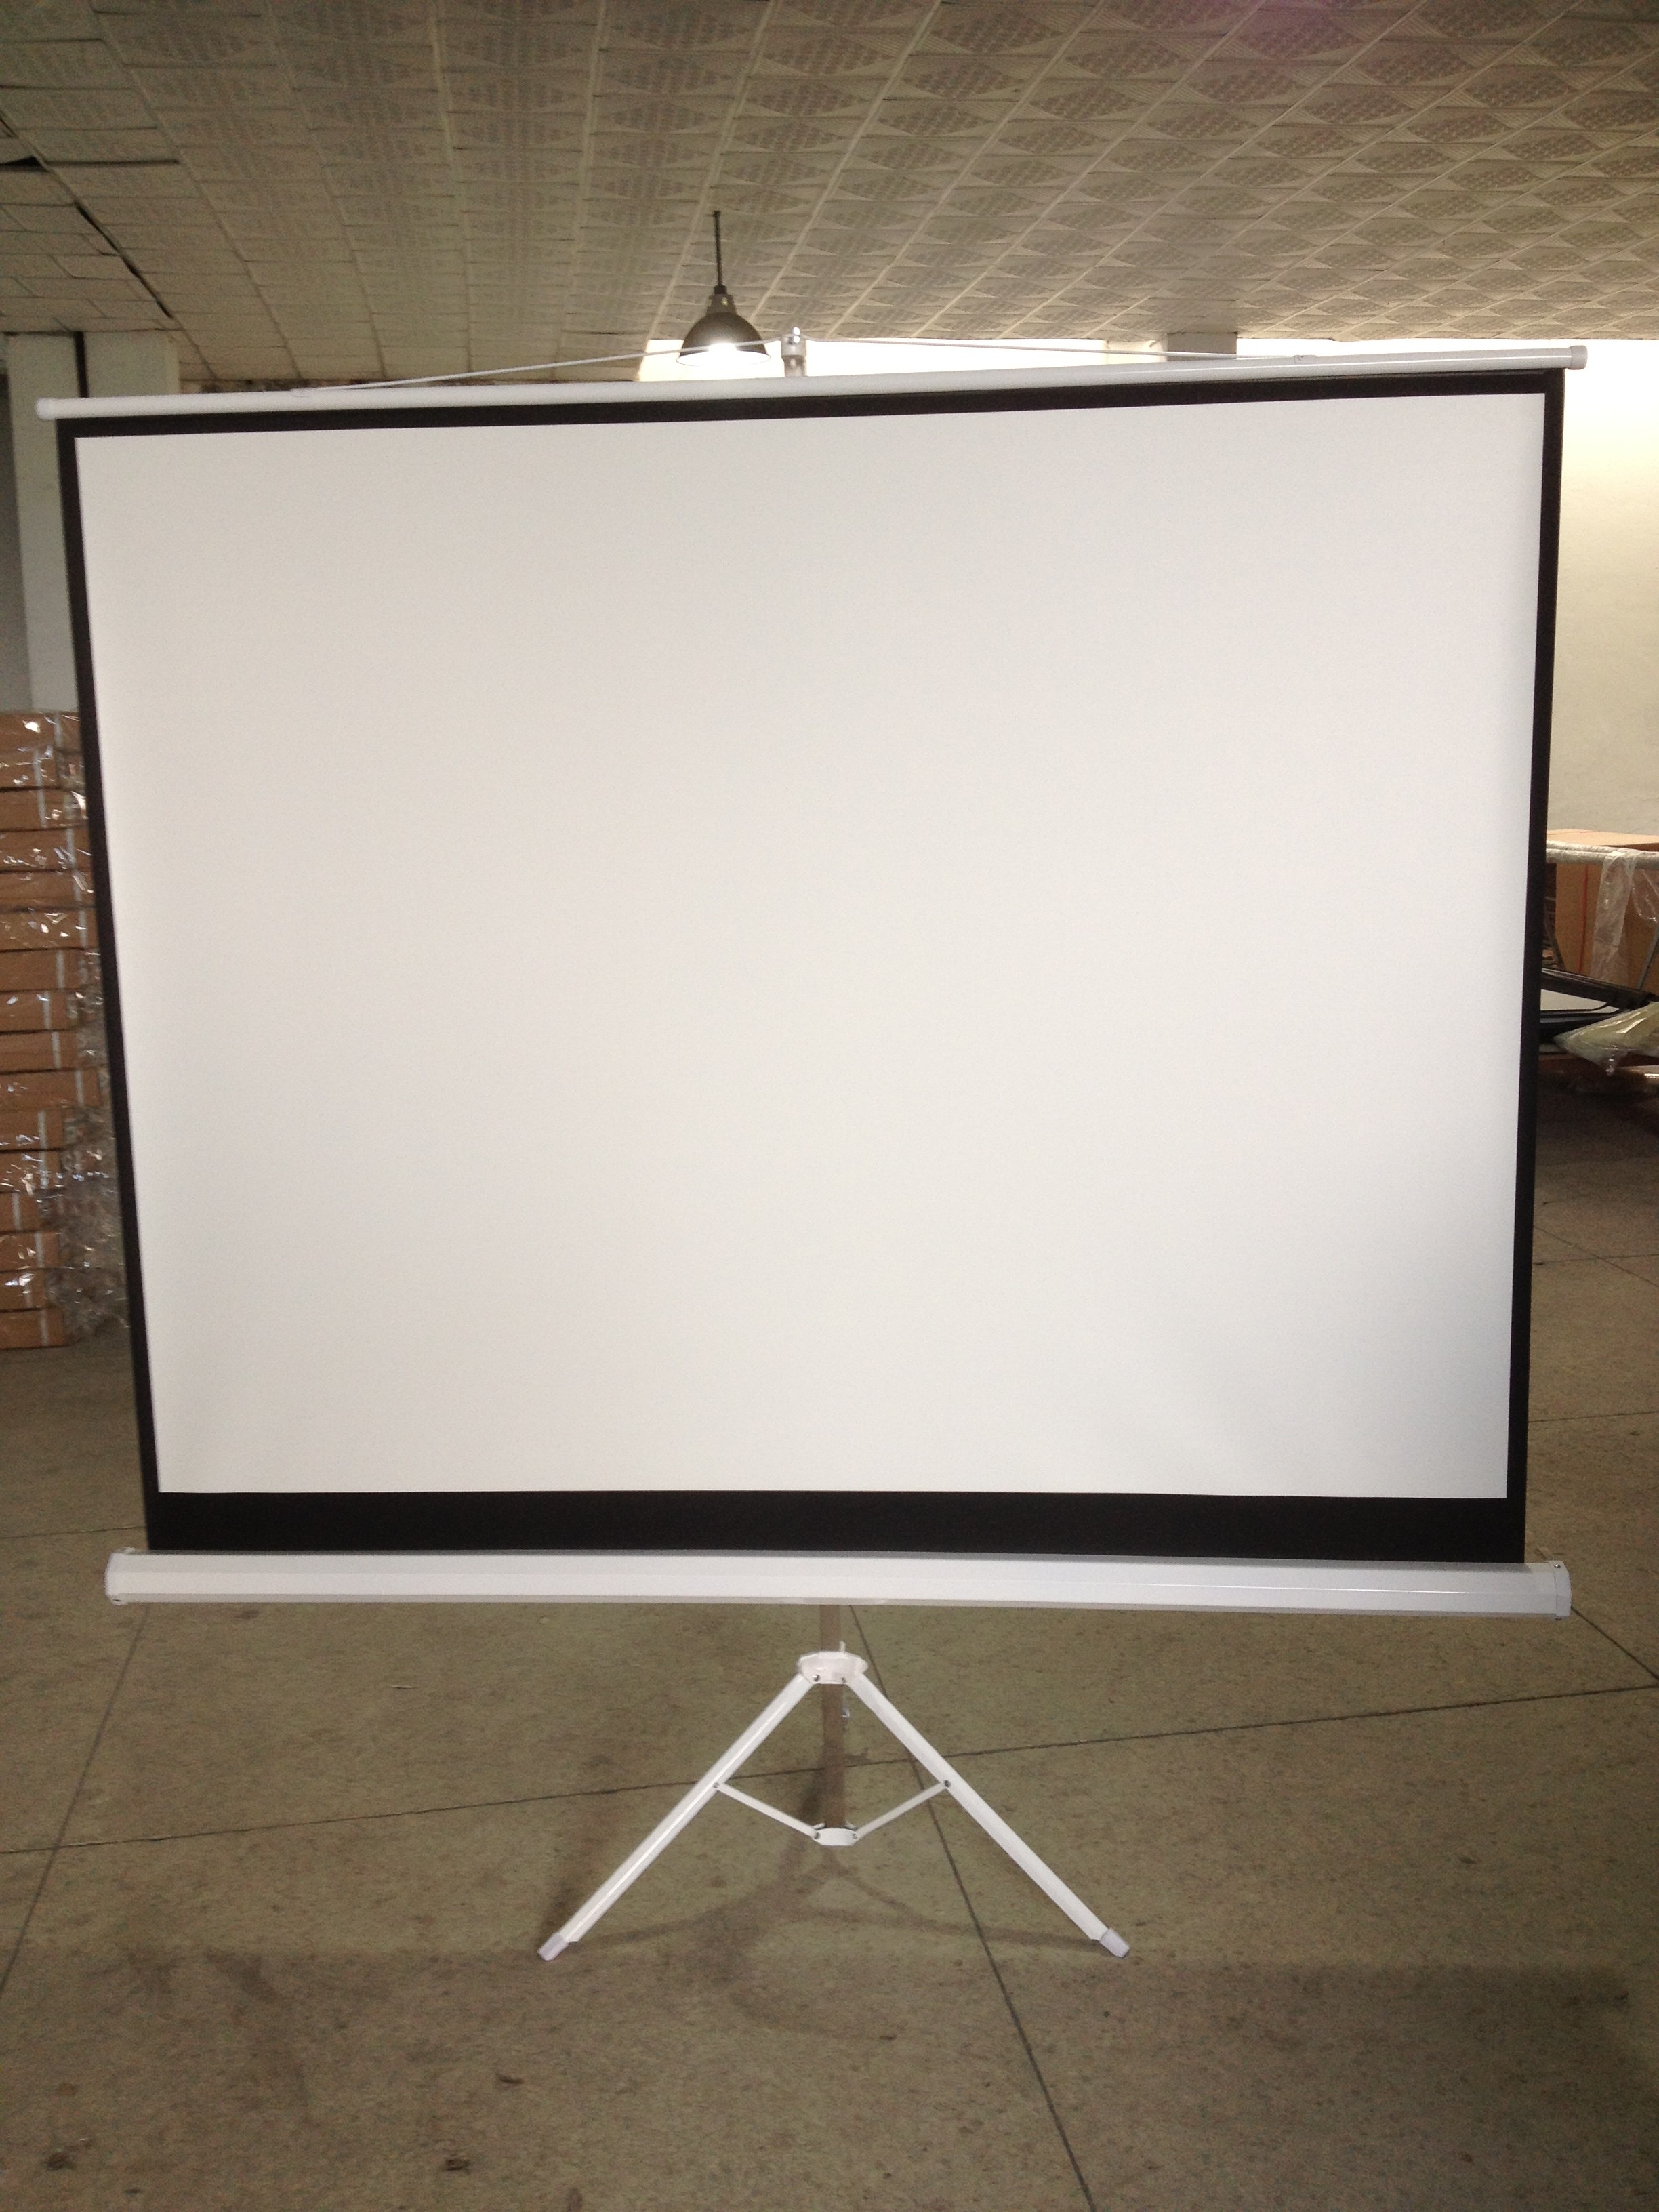 Tripod projection screen high quality projector screen